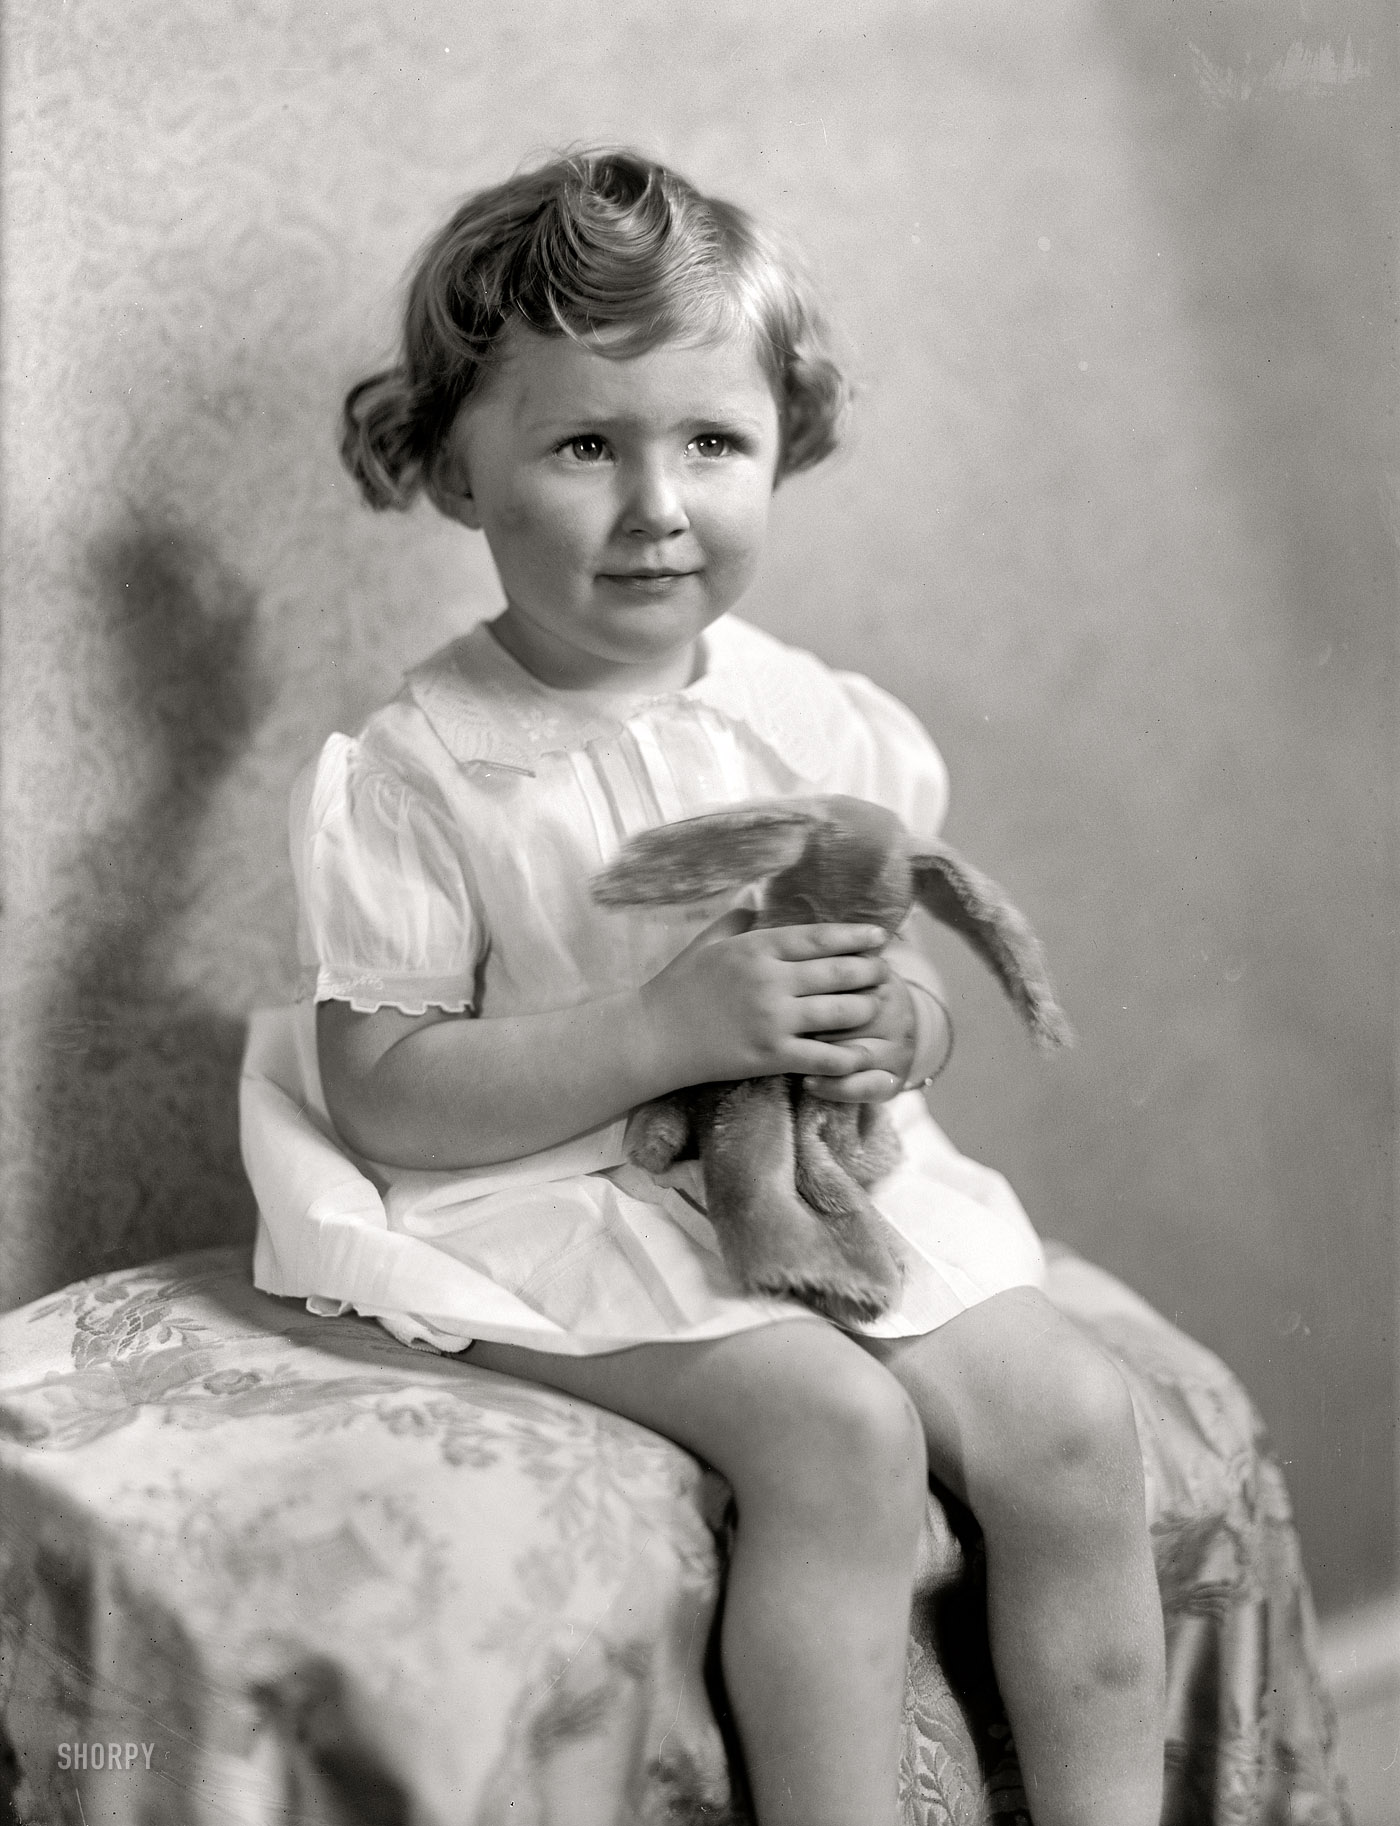 Washington, D.C., circa 1935. "Mary F. Trager, portrait." Harris & Ewing Collection glass negative. View full size.